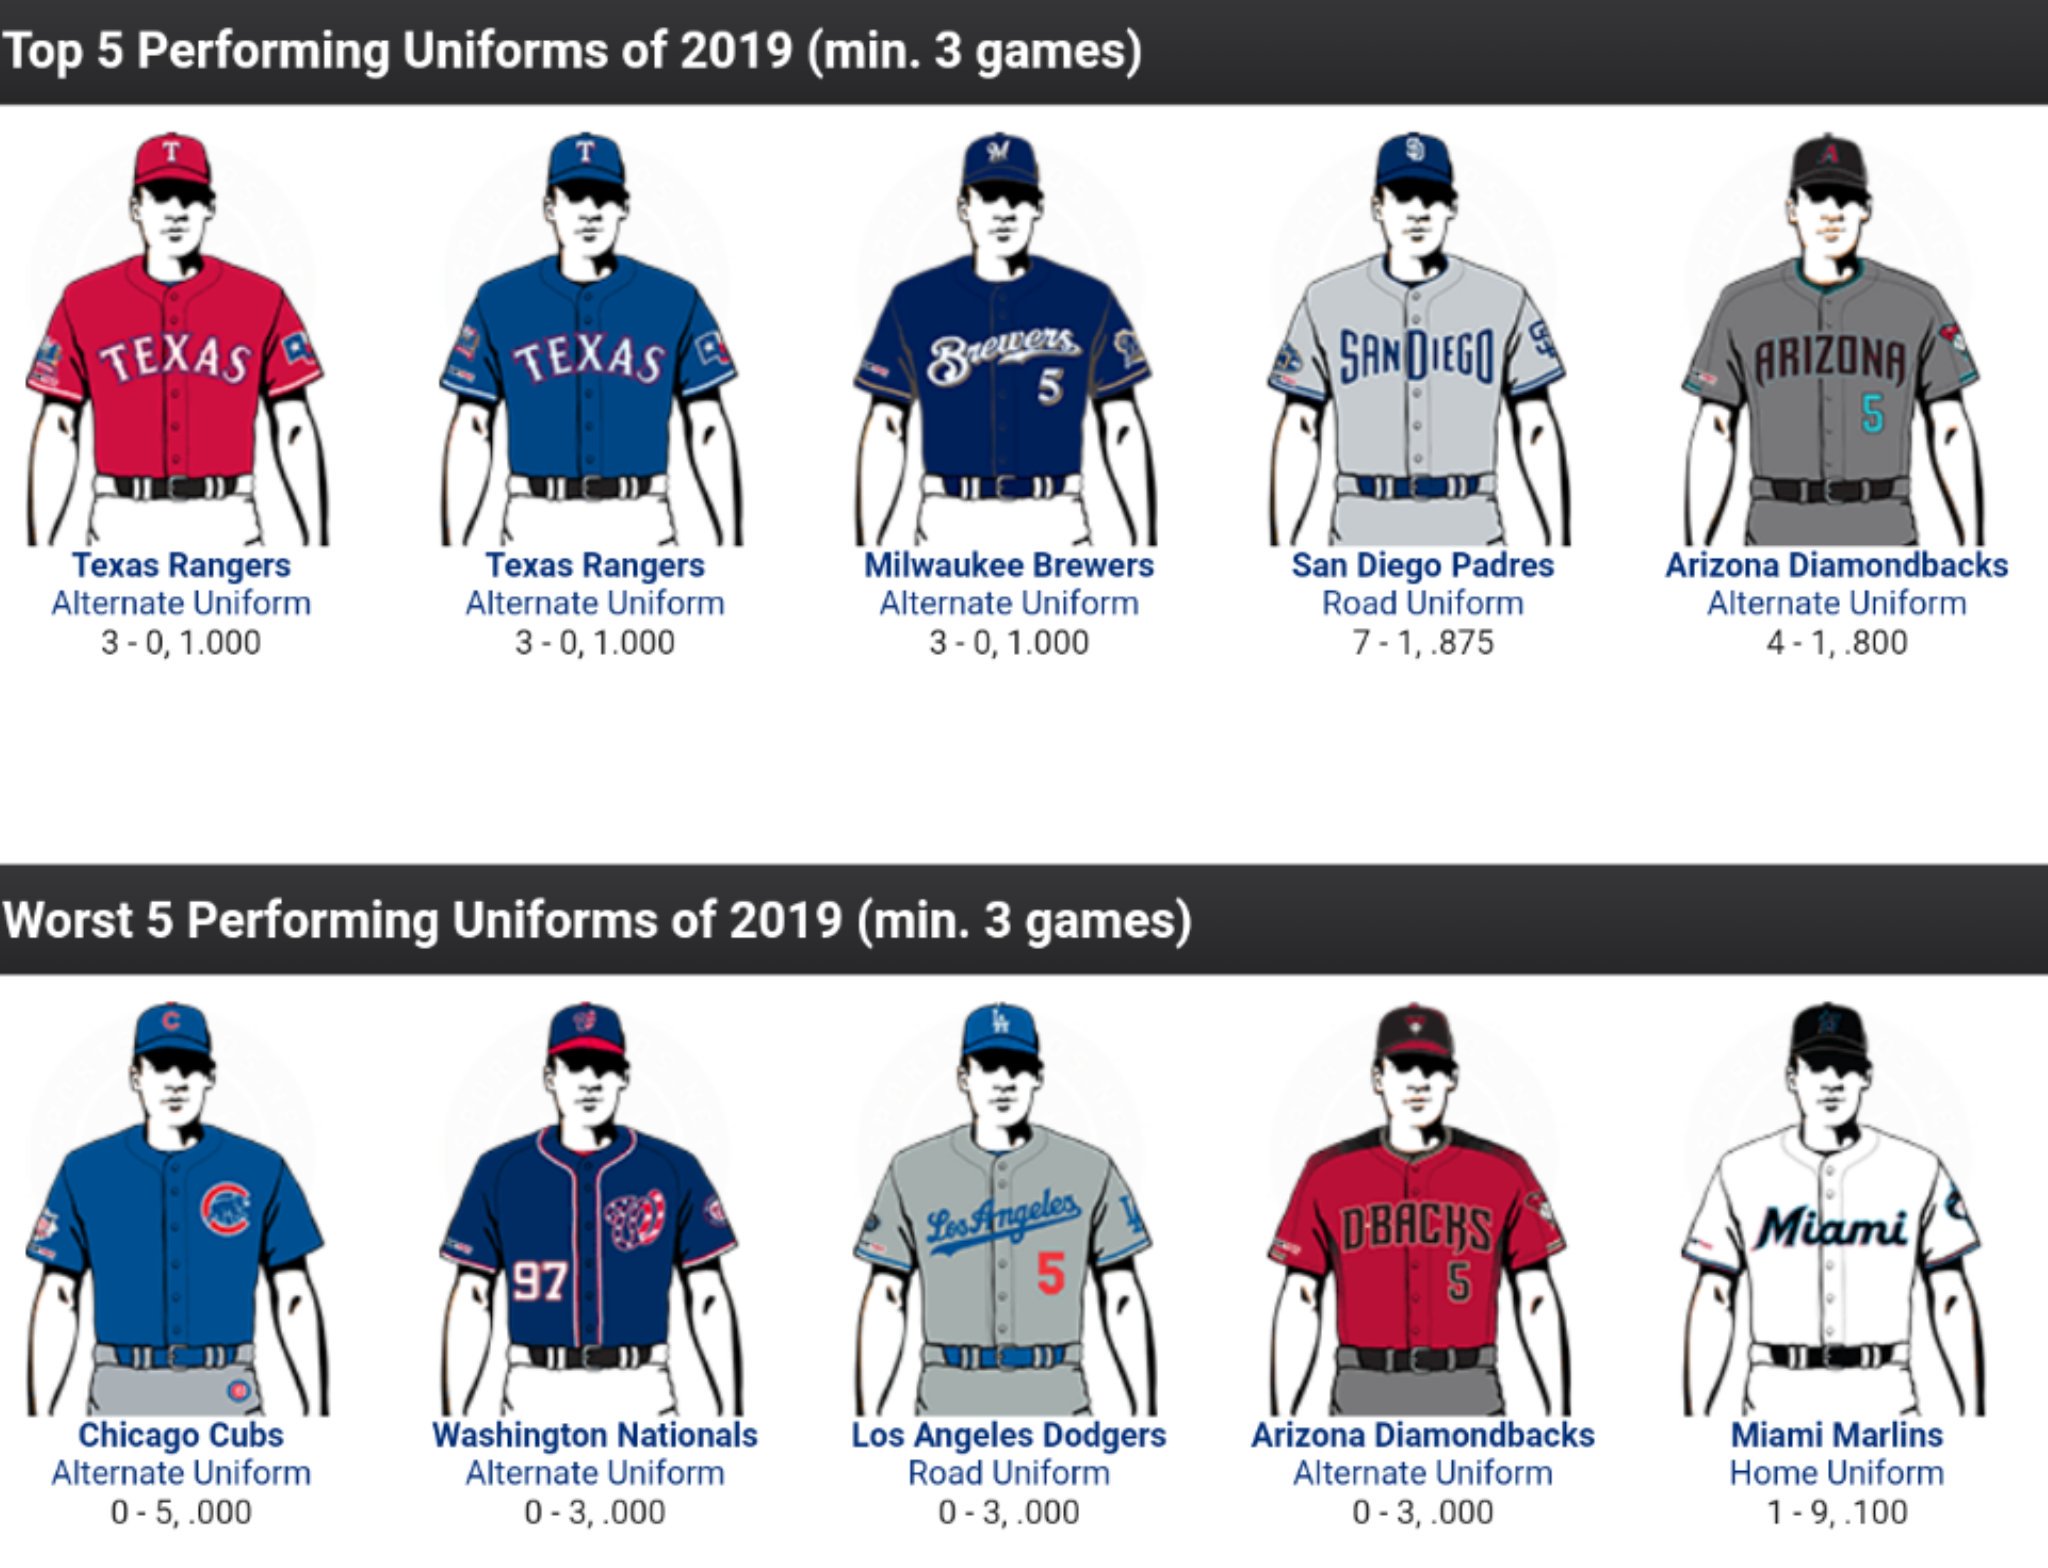 Chris Creamer  SportsLogos.Net on X: The #Cubs 0-5 record in blue is good for  the worst performing uniform across baseball so far in 2019, although the  #Marlins sitting at 1-9 in